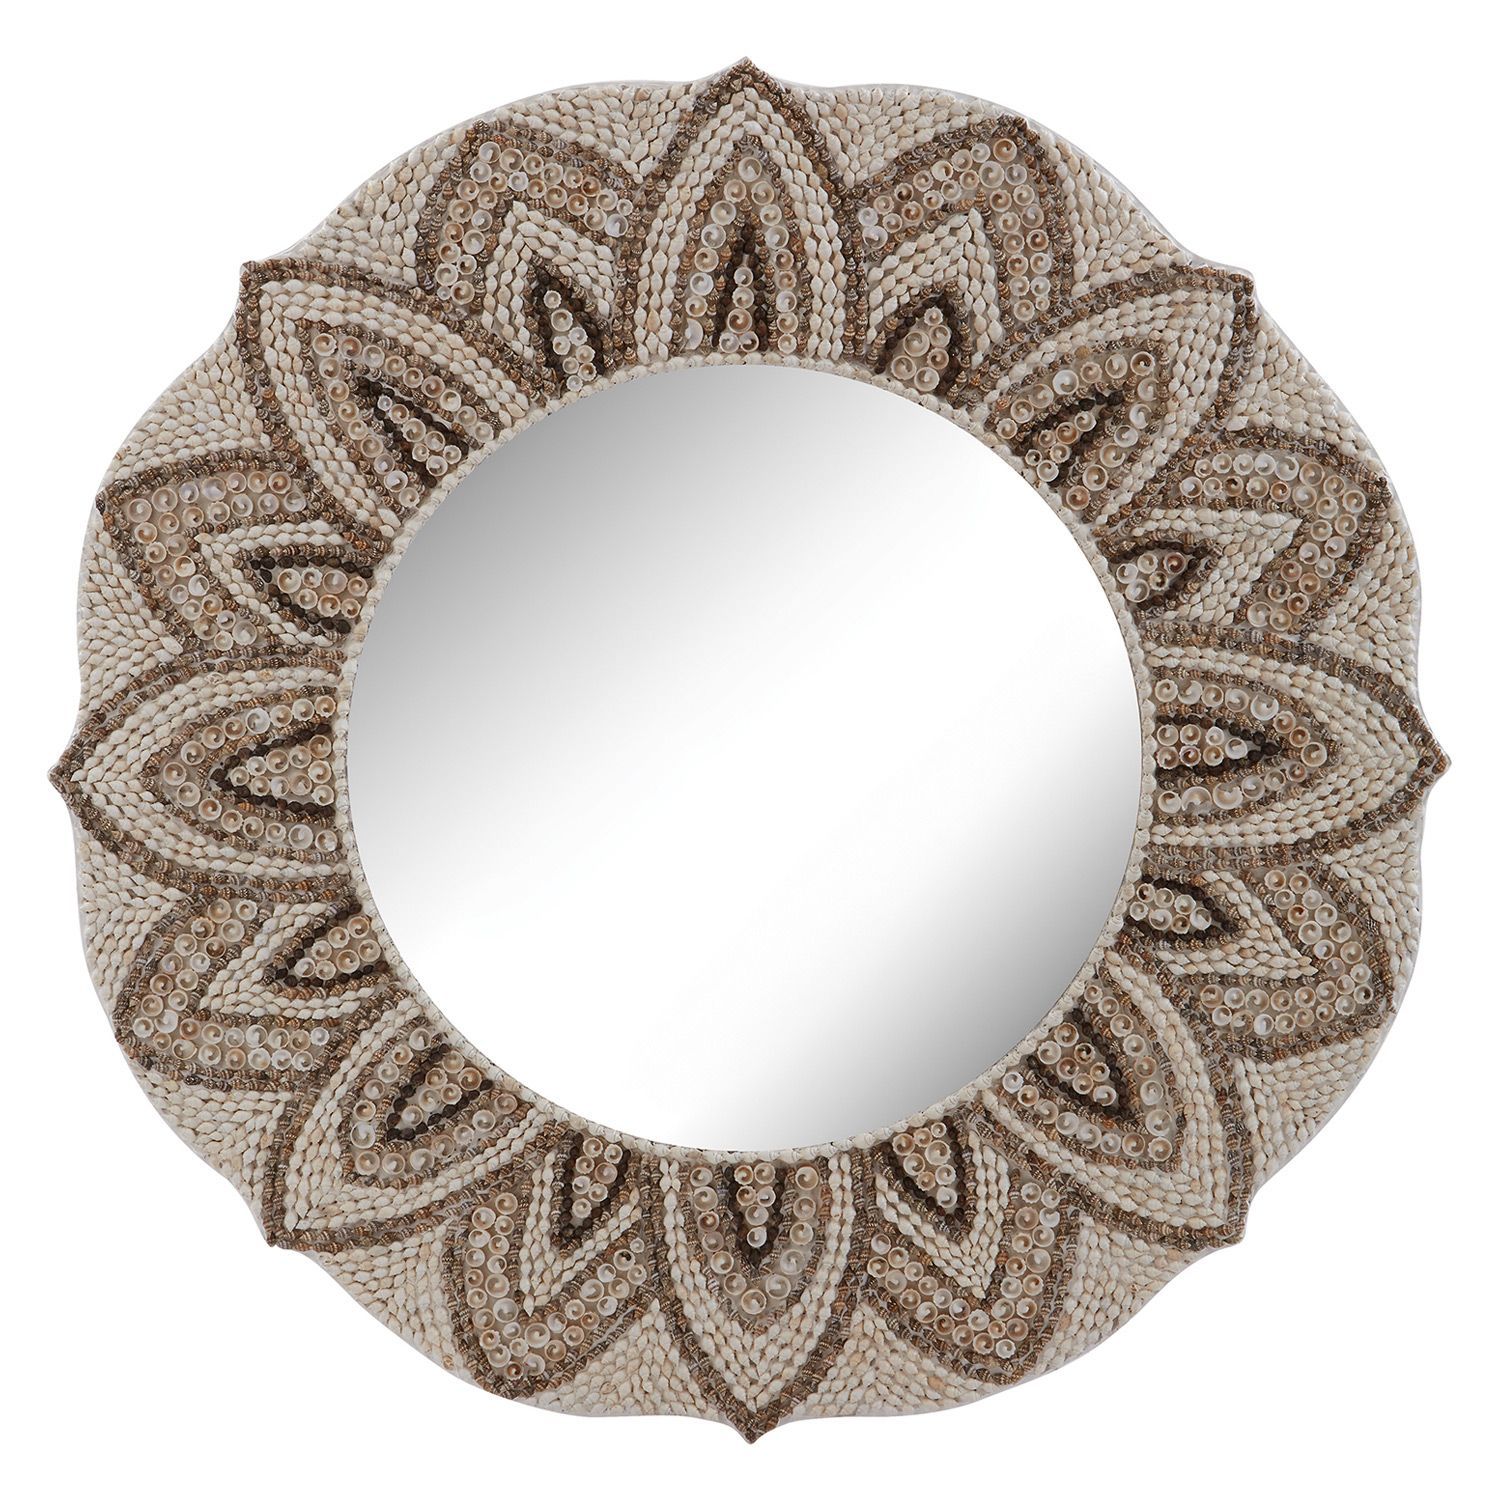 Natural Shell Flower Patterned Round Mirror @Laylagrayce | Shell Mirror Intended For Shell Mosaic Wall Mirrors (View 11 of 15)